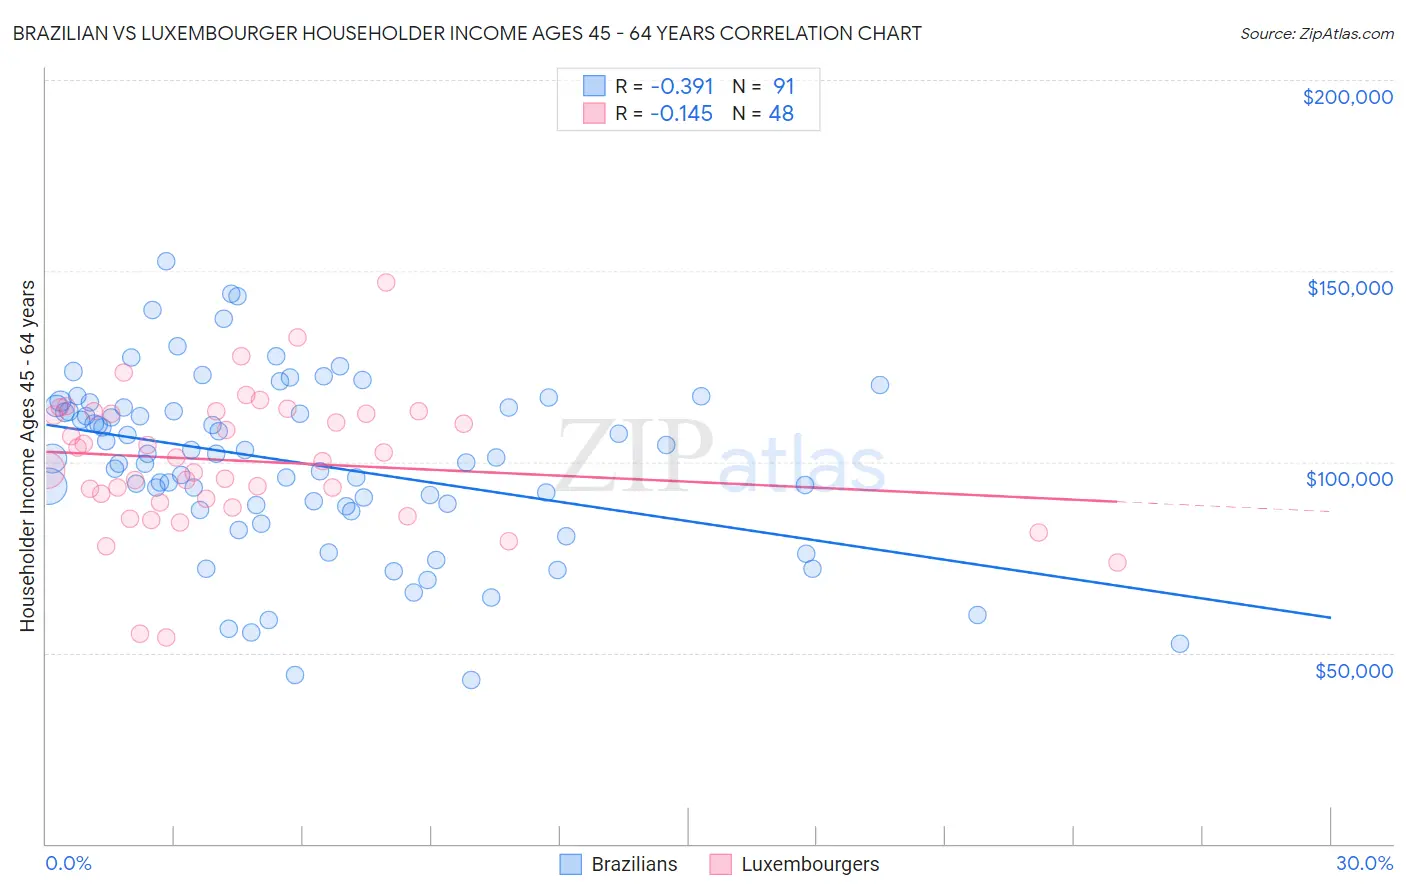 Brazilian vs Luxembourger Householder Income Ages 45 - 64 years